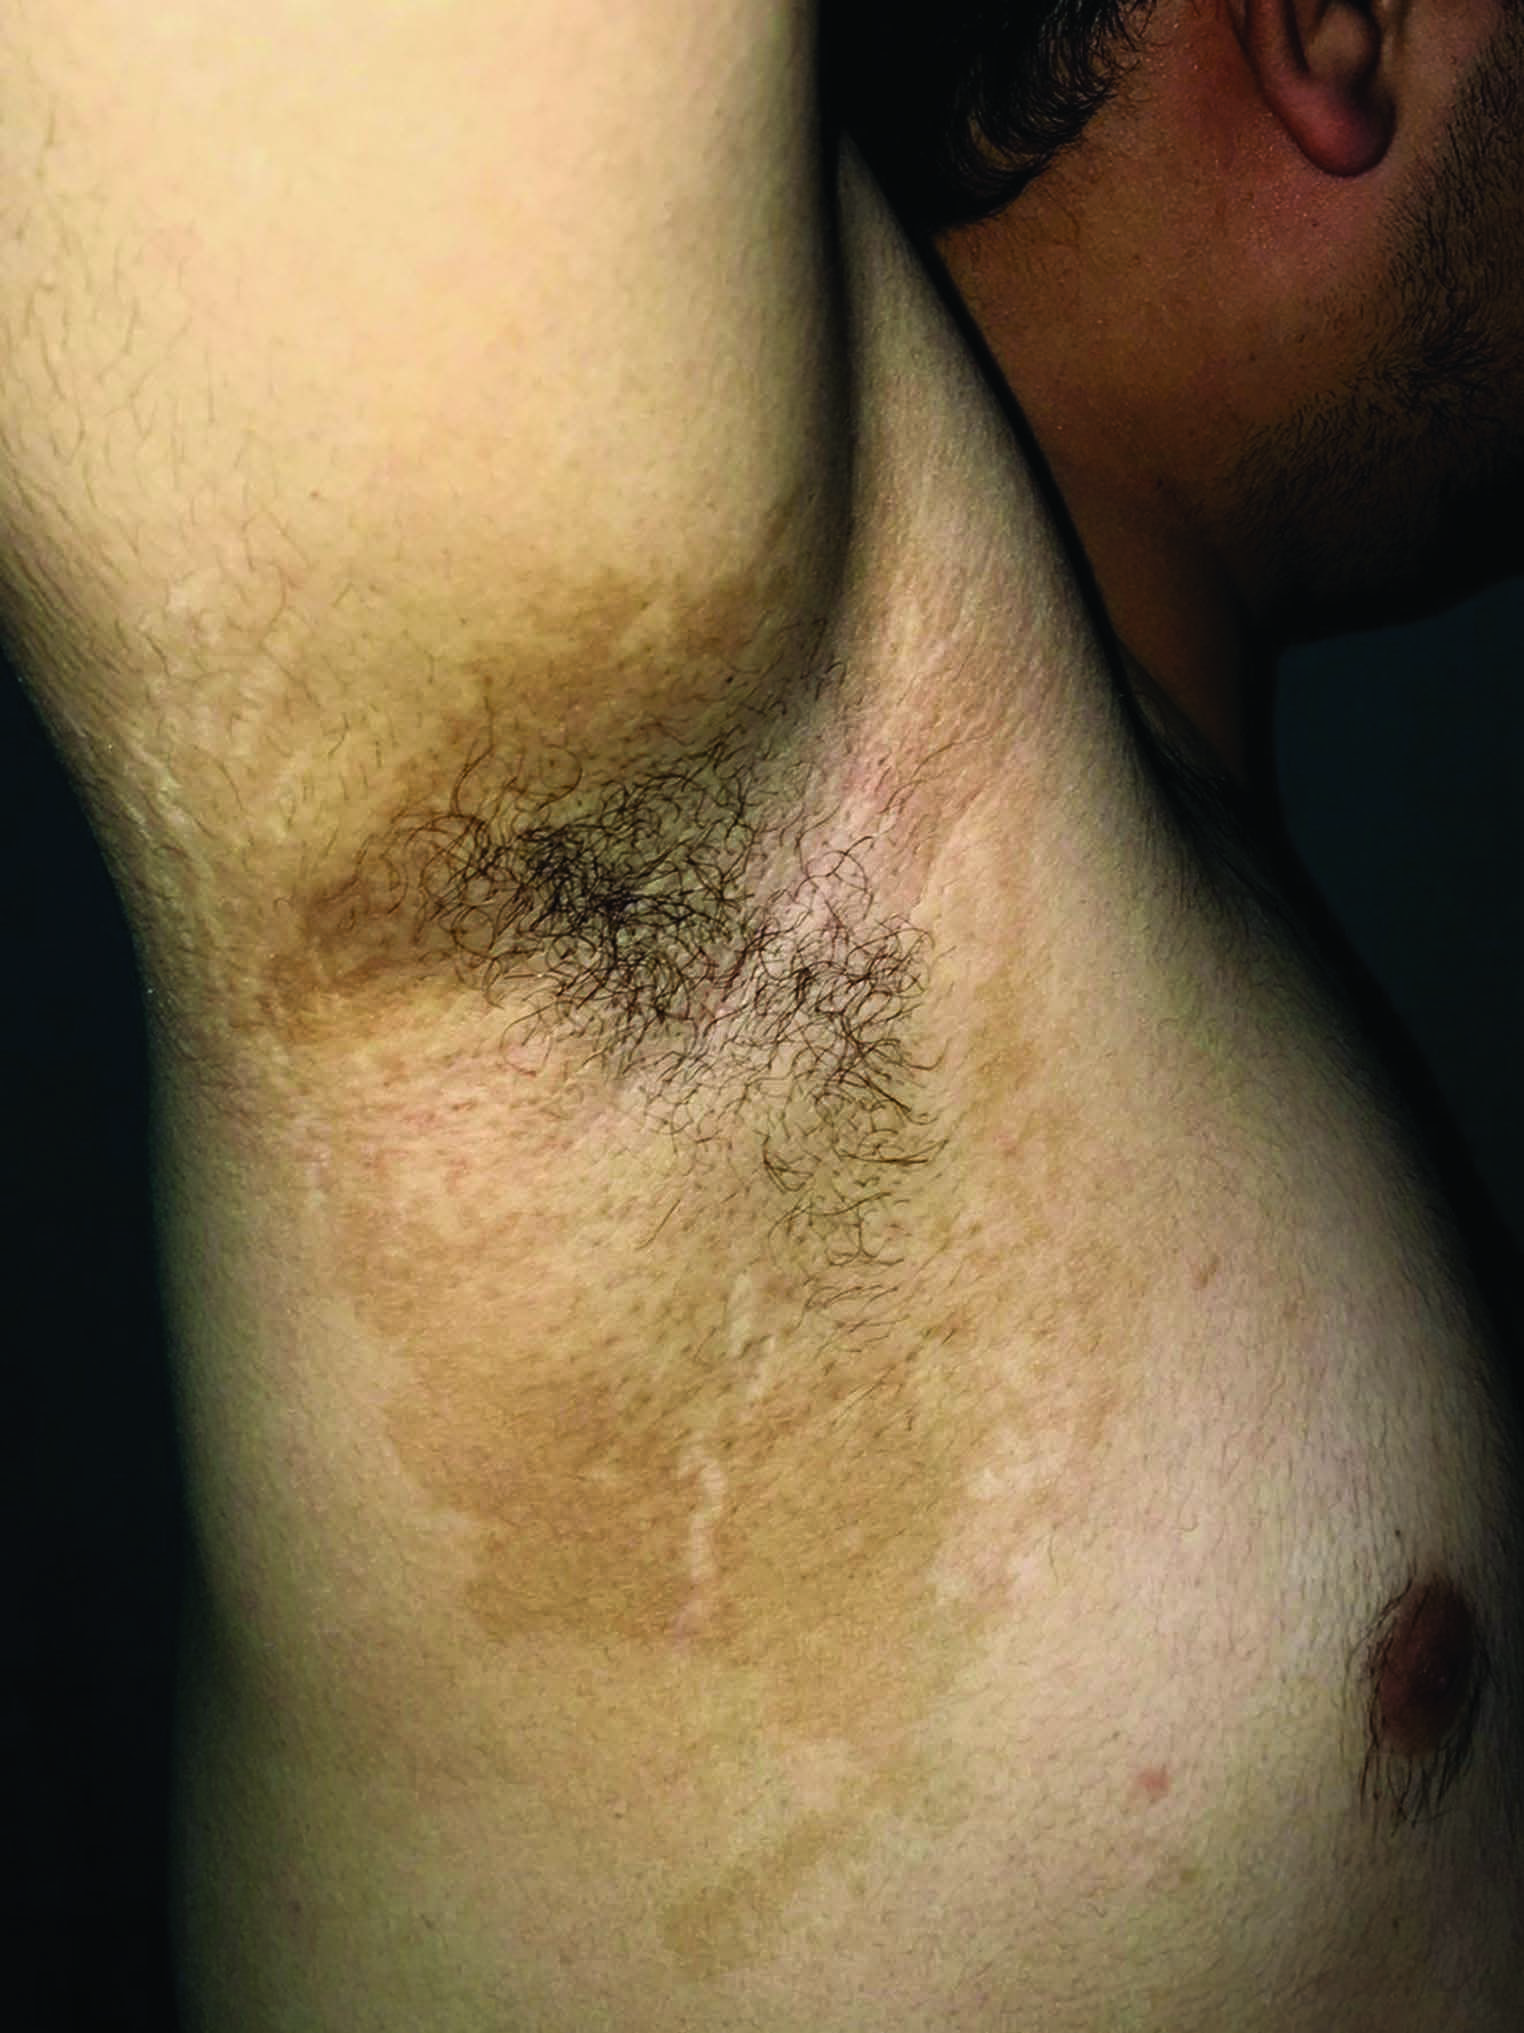 Pigmented contact dermatitis in the axilla caused by cologne spray.